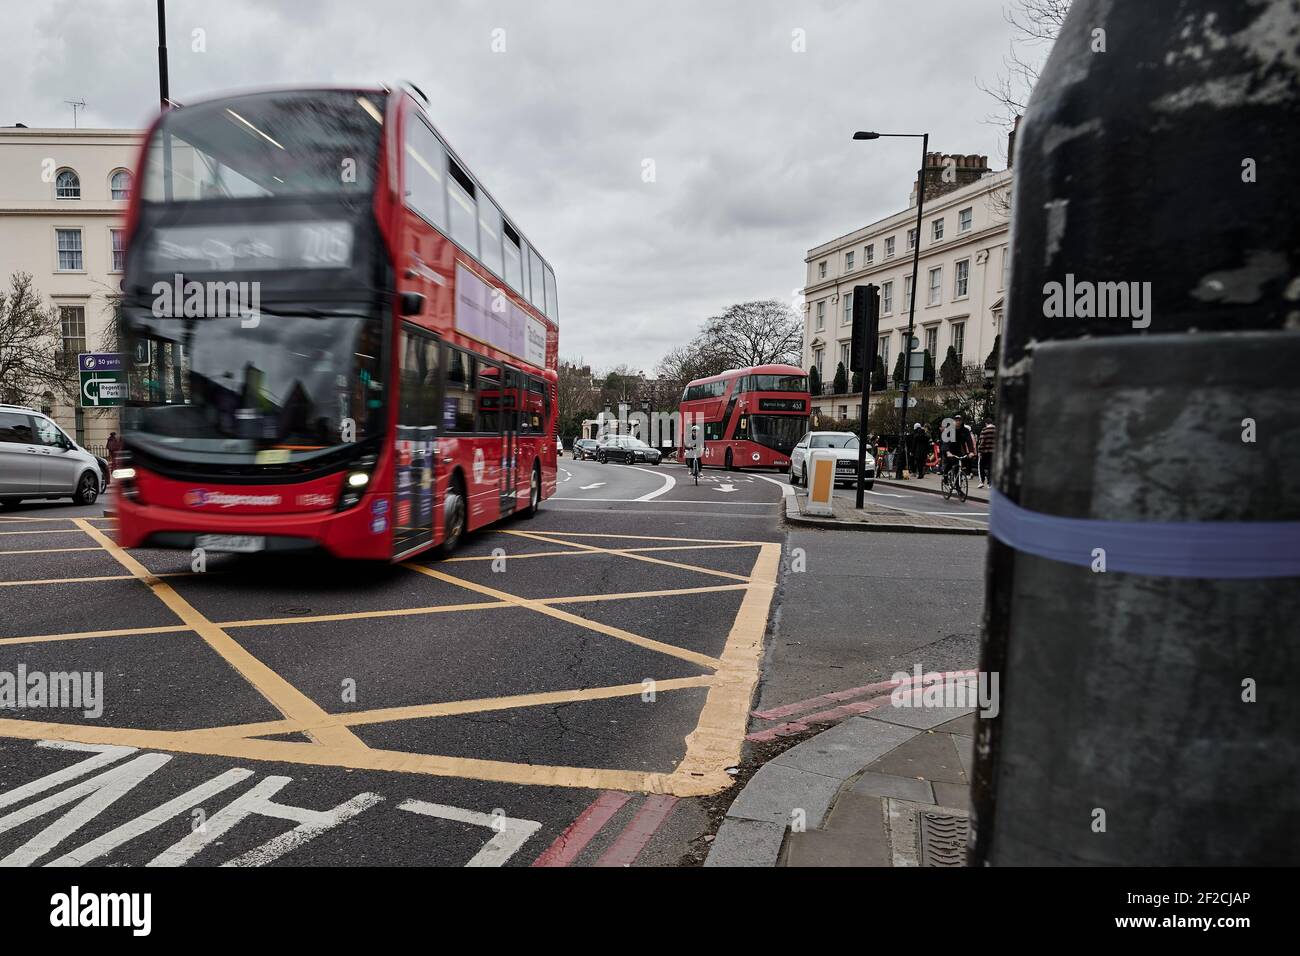 LondonUK - 6 Mar 2021: Motion Blurred image of modern red london double decker bus passing through a busy traffic junction over yellow hashed box Stock Photo